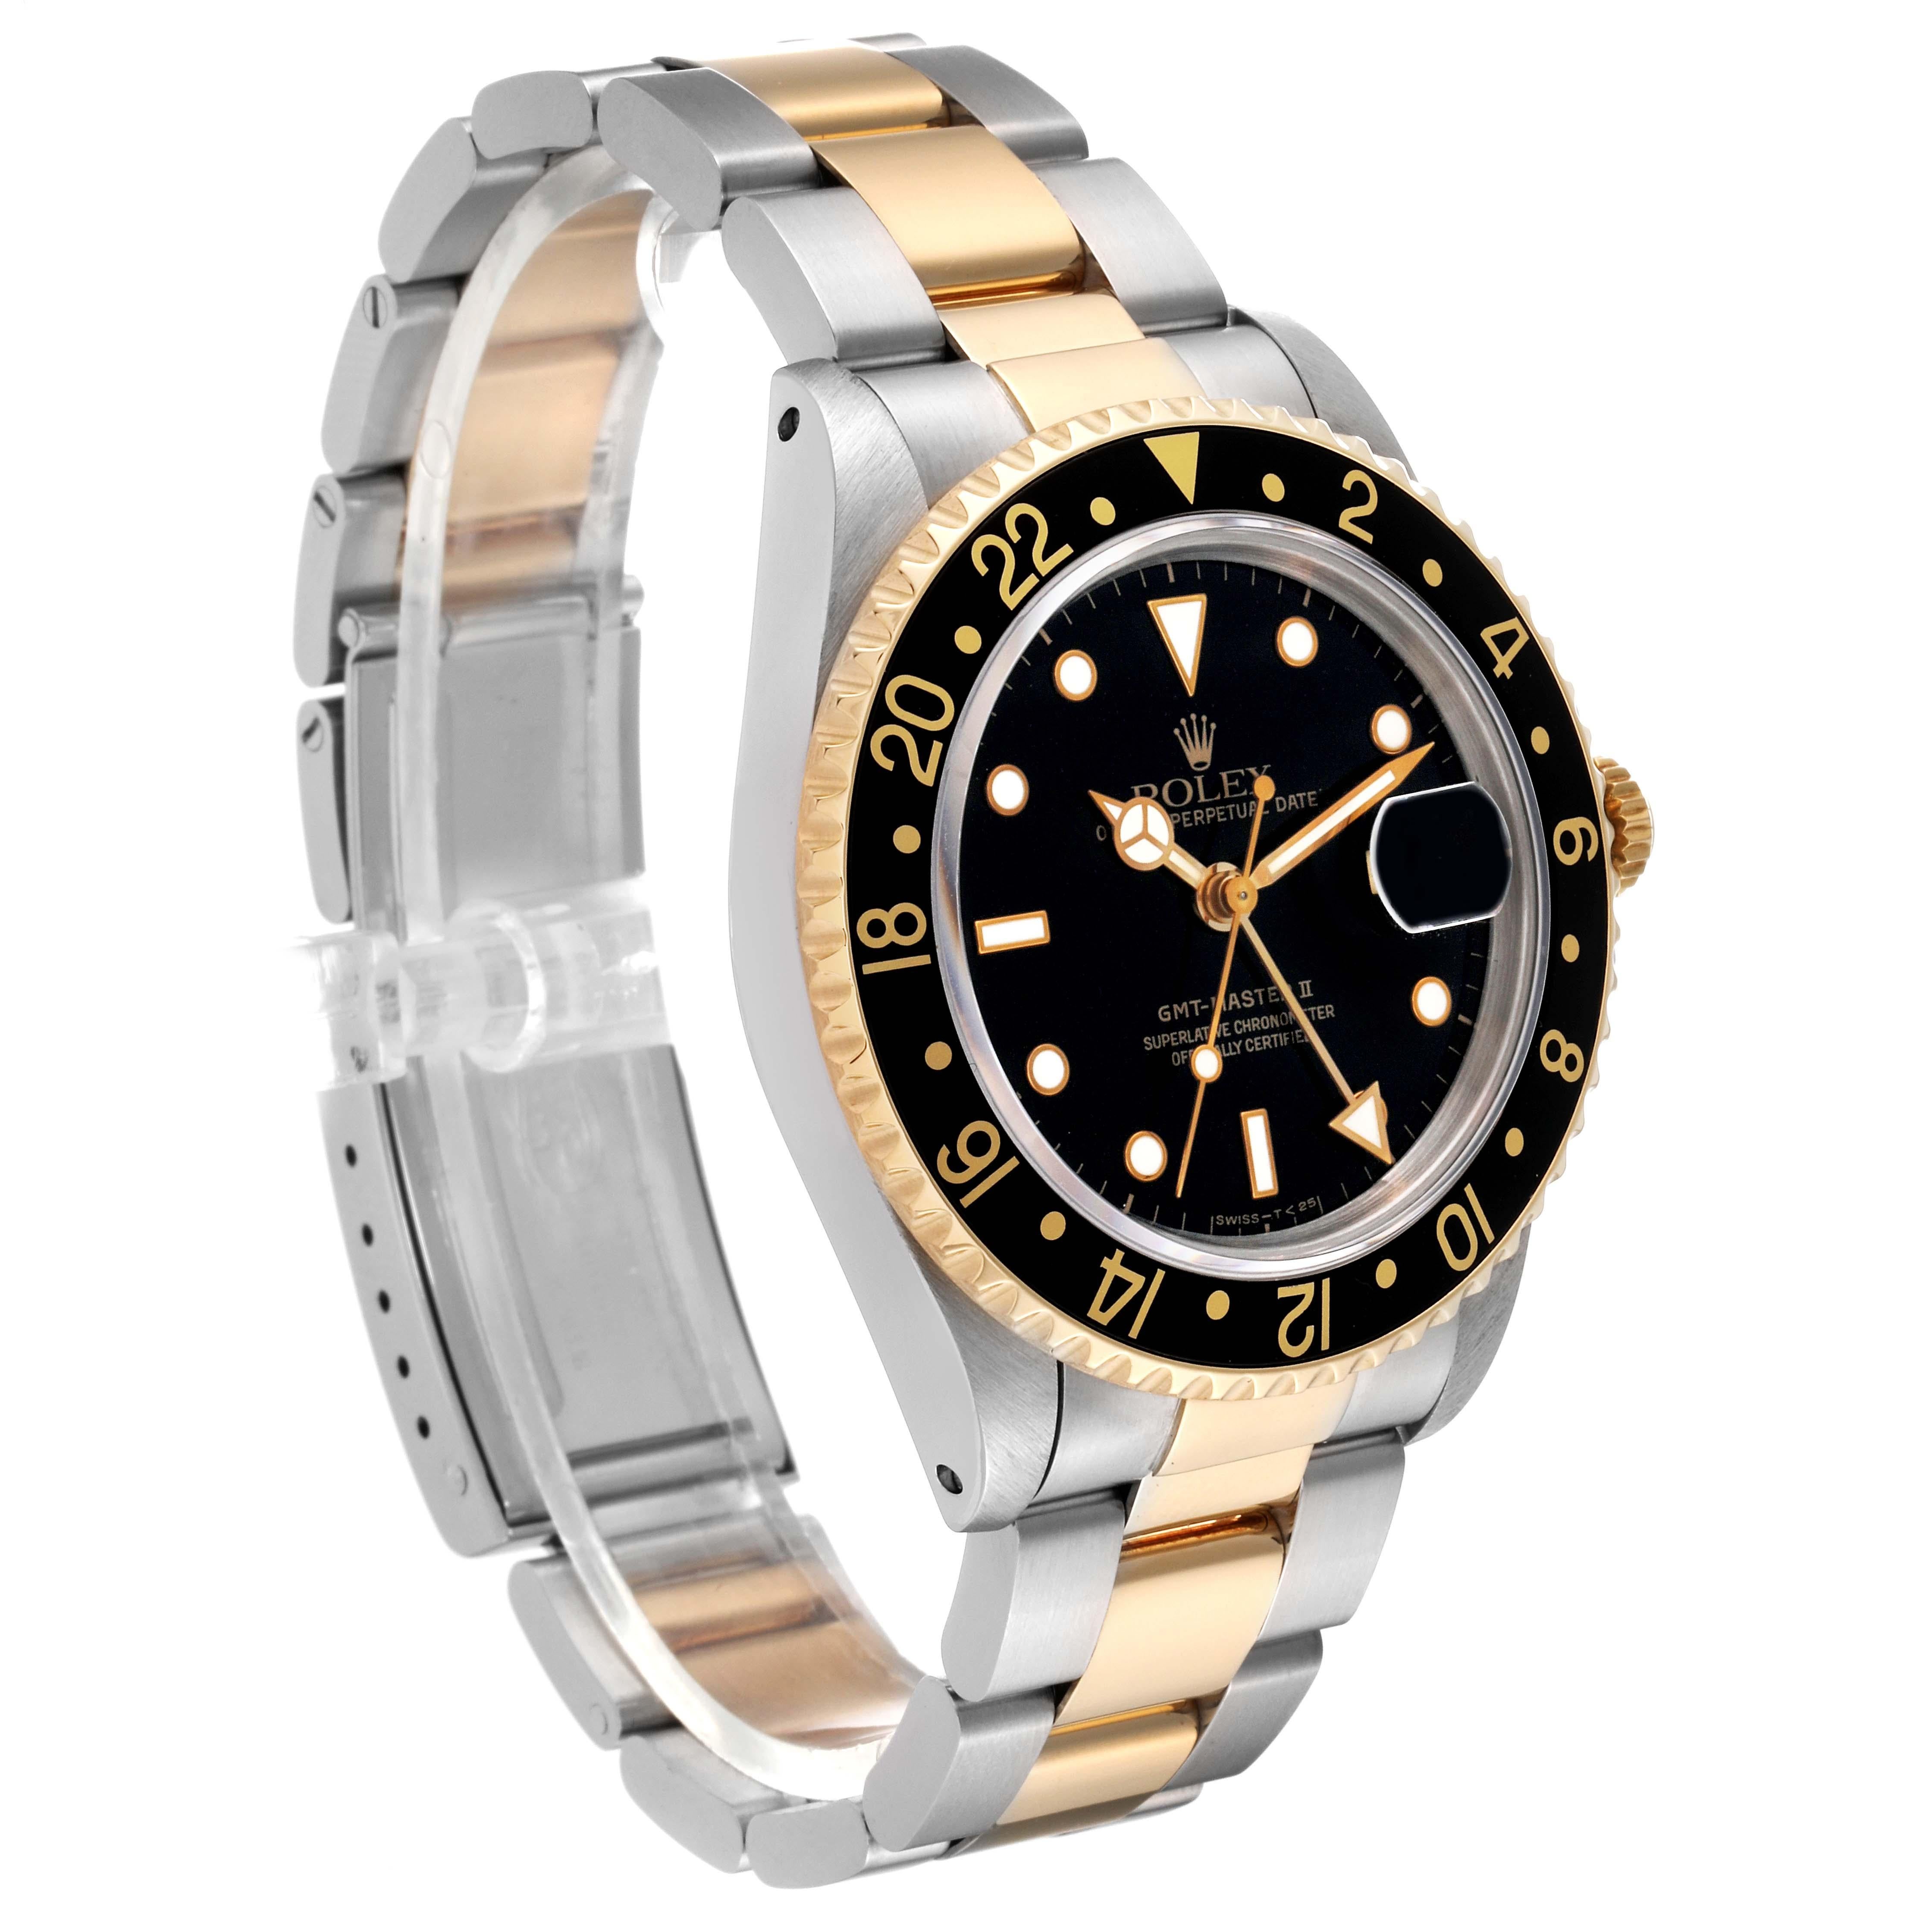 Rolex GMT Master II Yellow Gold Steel Oyster Bracelet Mens Watch 16713 For Sale 3